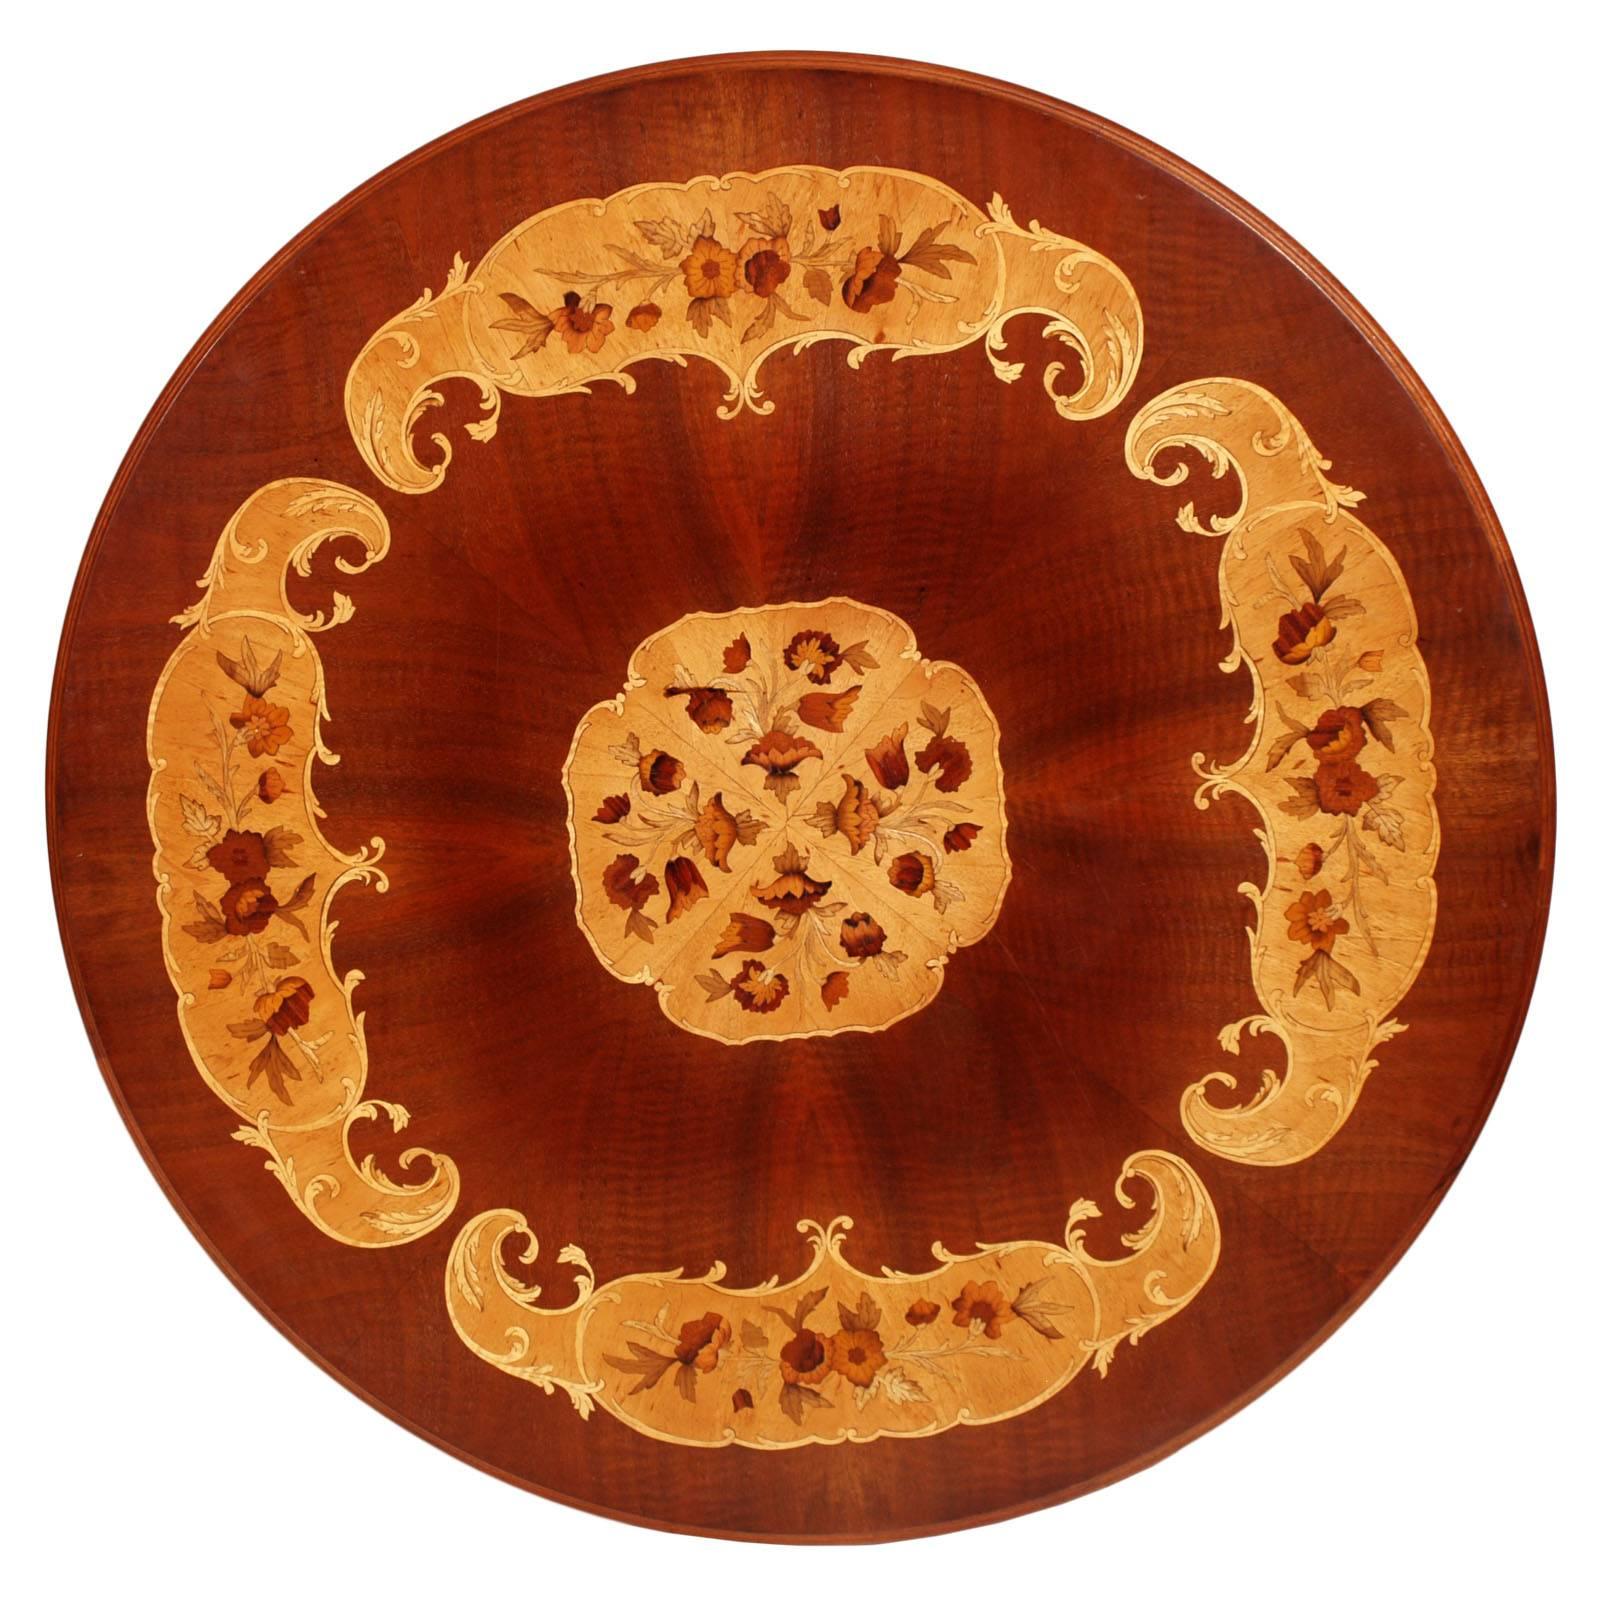 Italian 1890-1910 Sorrento inlaid walnut Neaples Baroque round table in excellent patina e conditions polished to wax.
Rich and refined manual inlays with fruits wood of the Sorrento peninsula with floral and fruity motifs, as only the cabinet